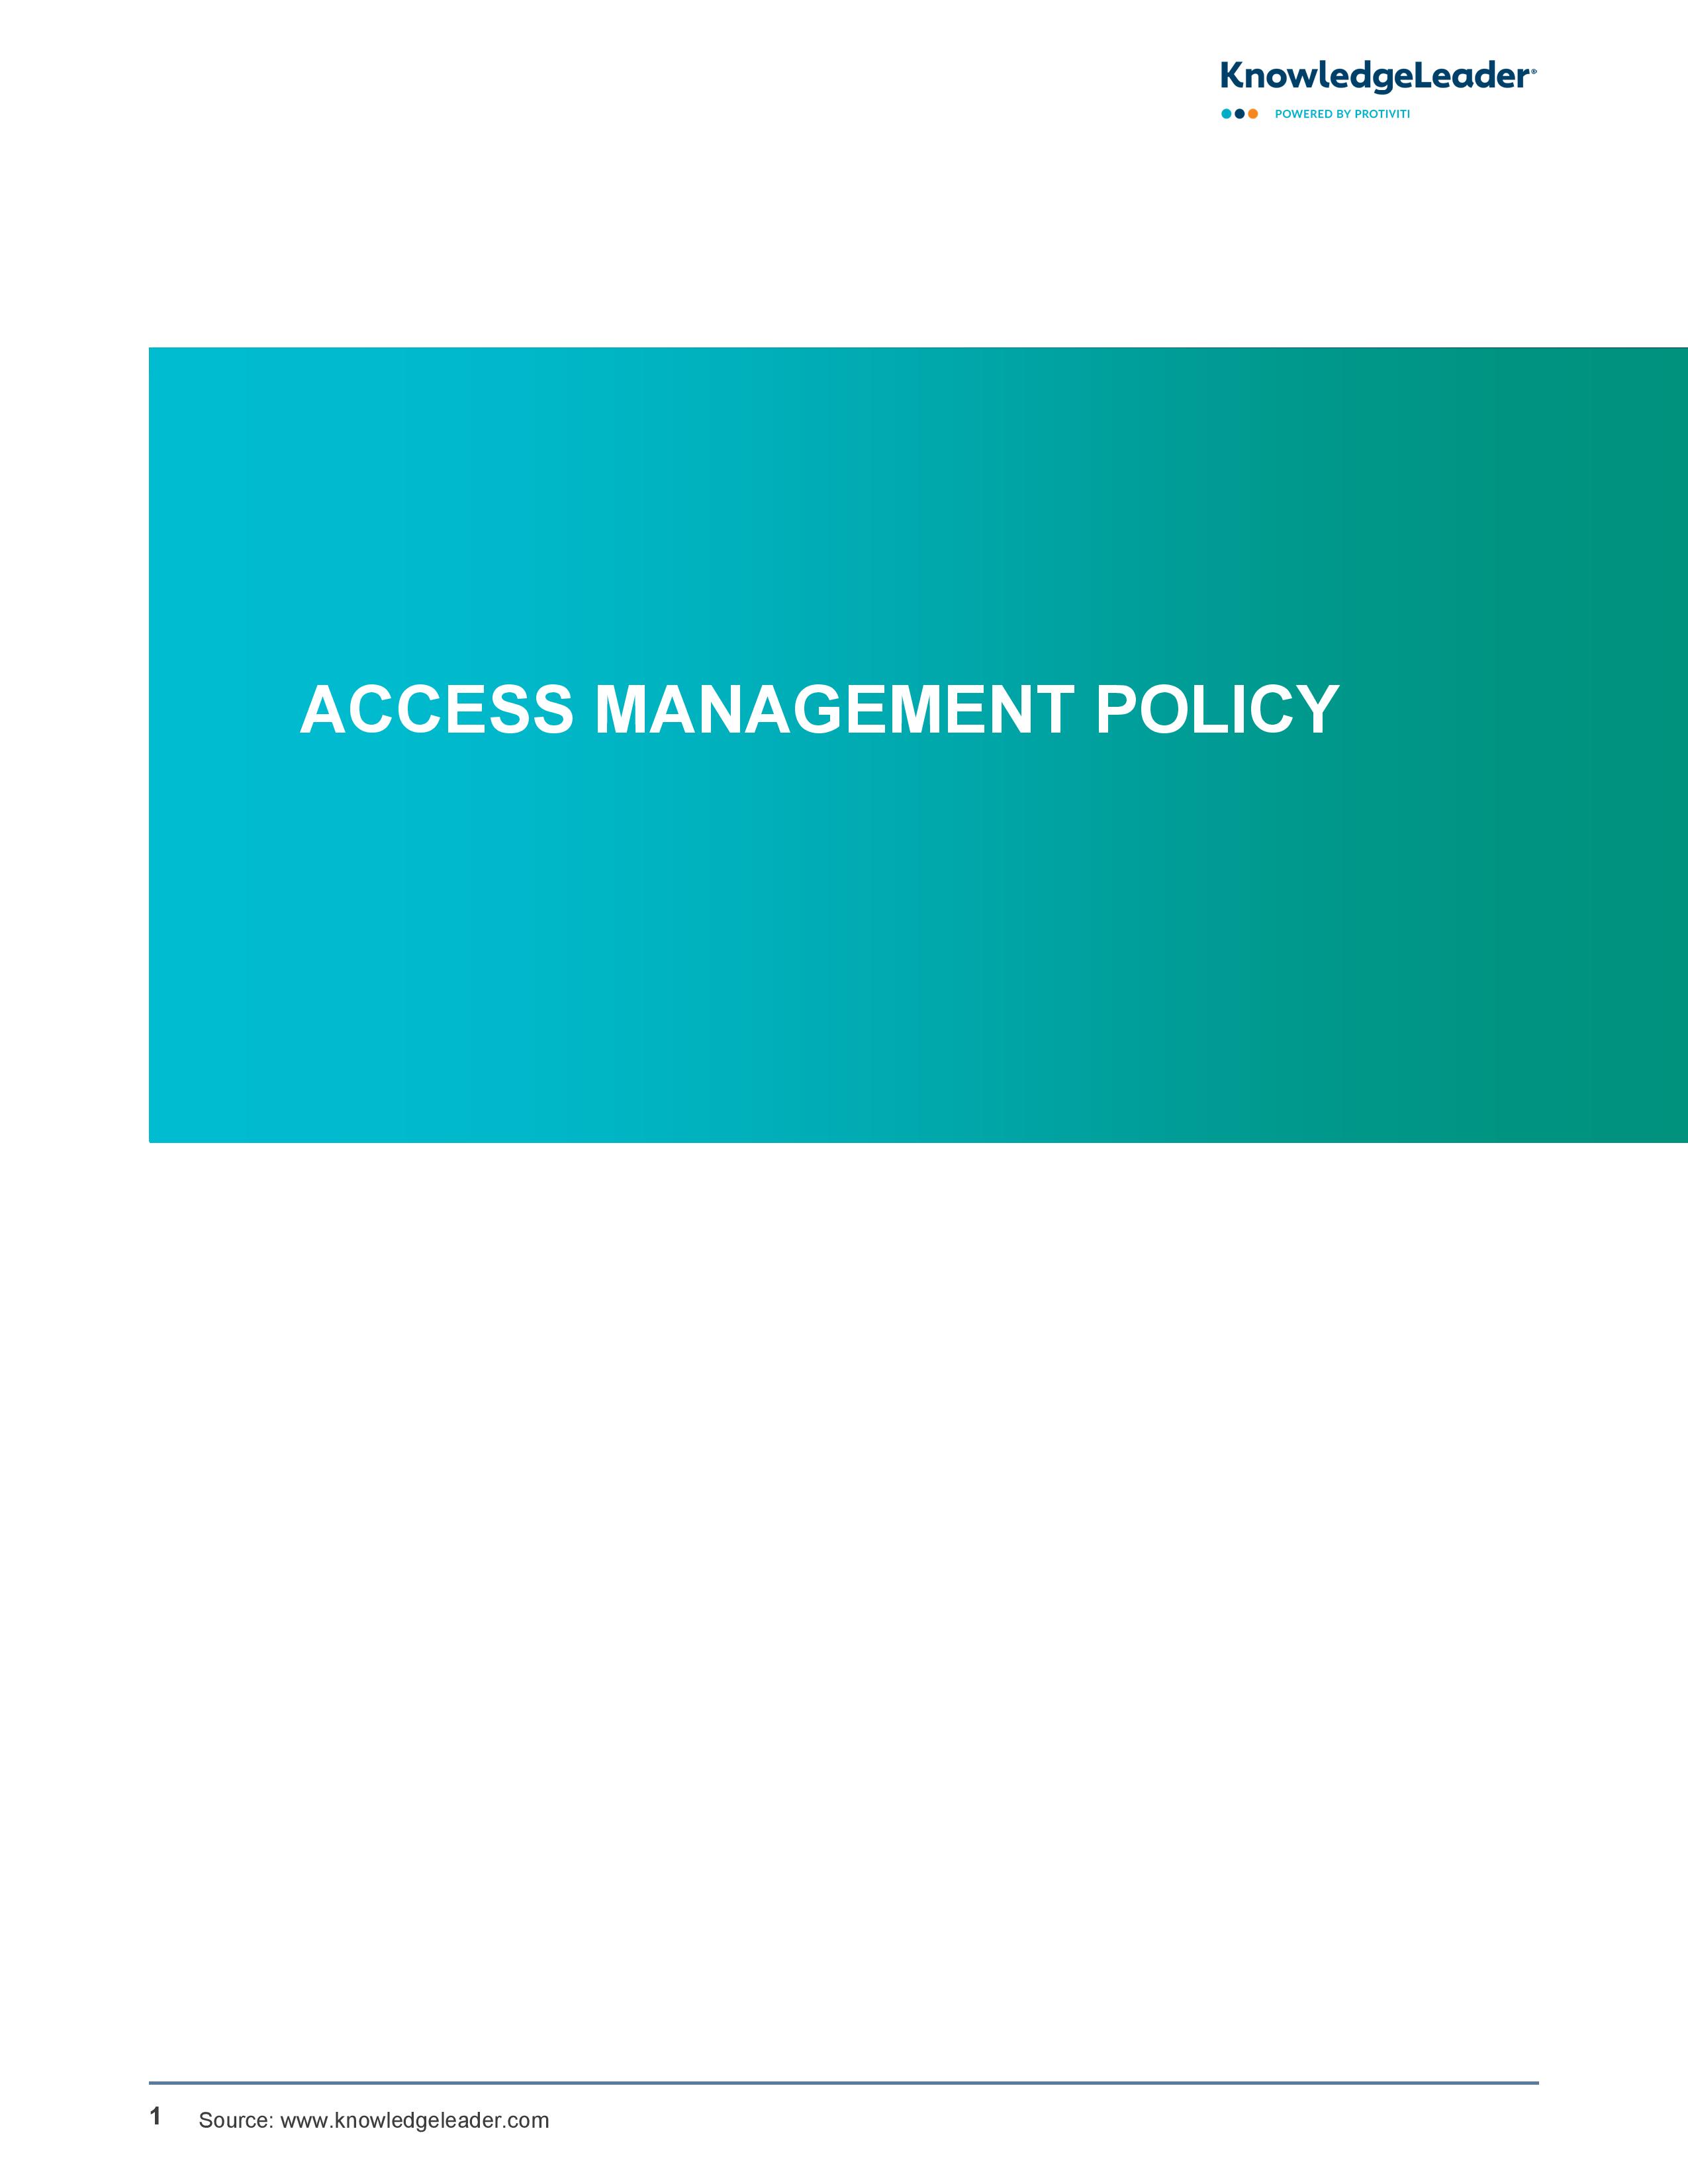 screenshot of the first page of Access Management Policy